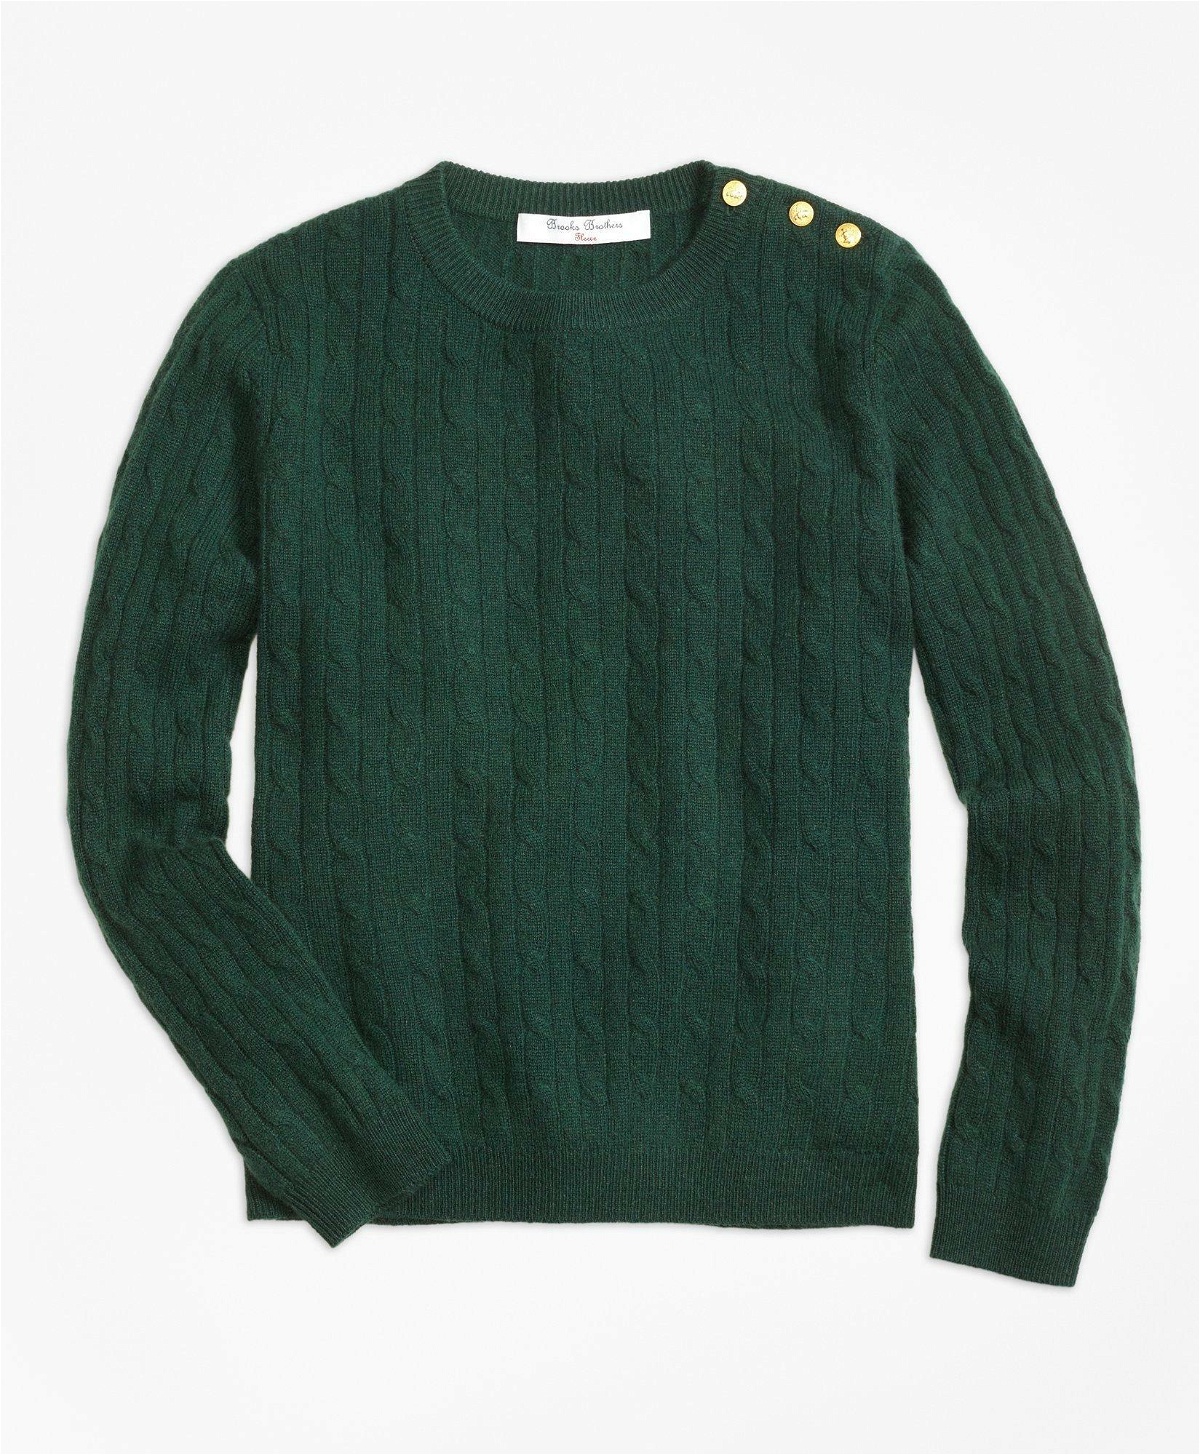 Brooks Brothers Girls Cashmere Cable Crewneck Sweater | Dark Green ...